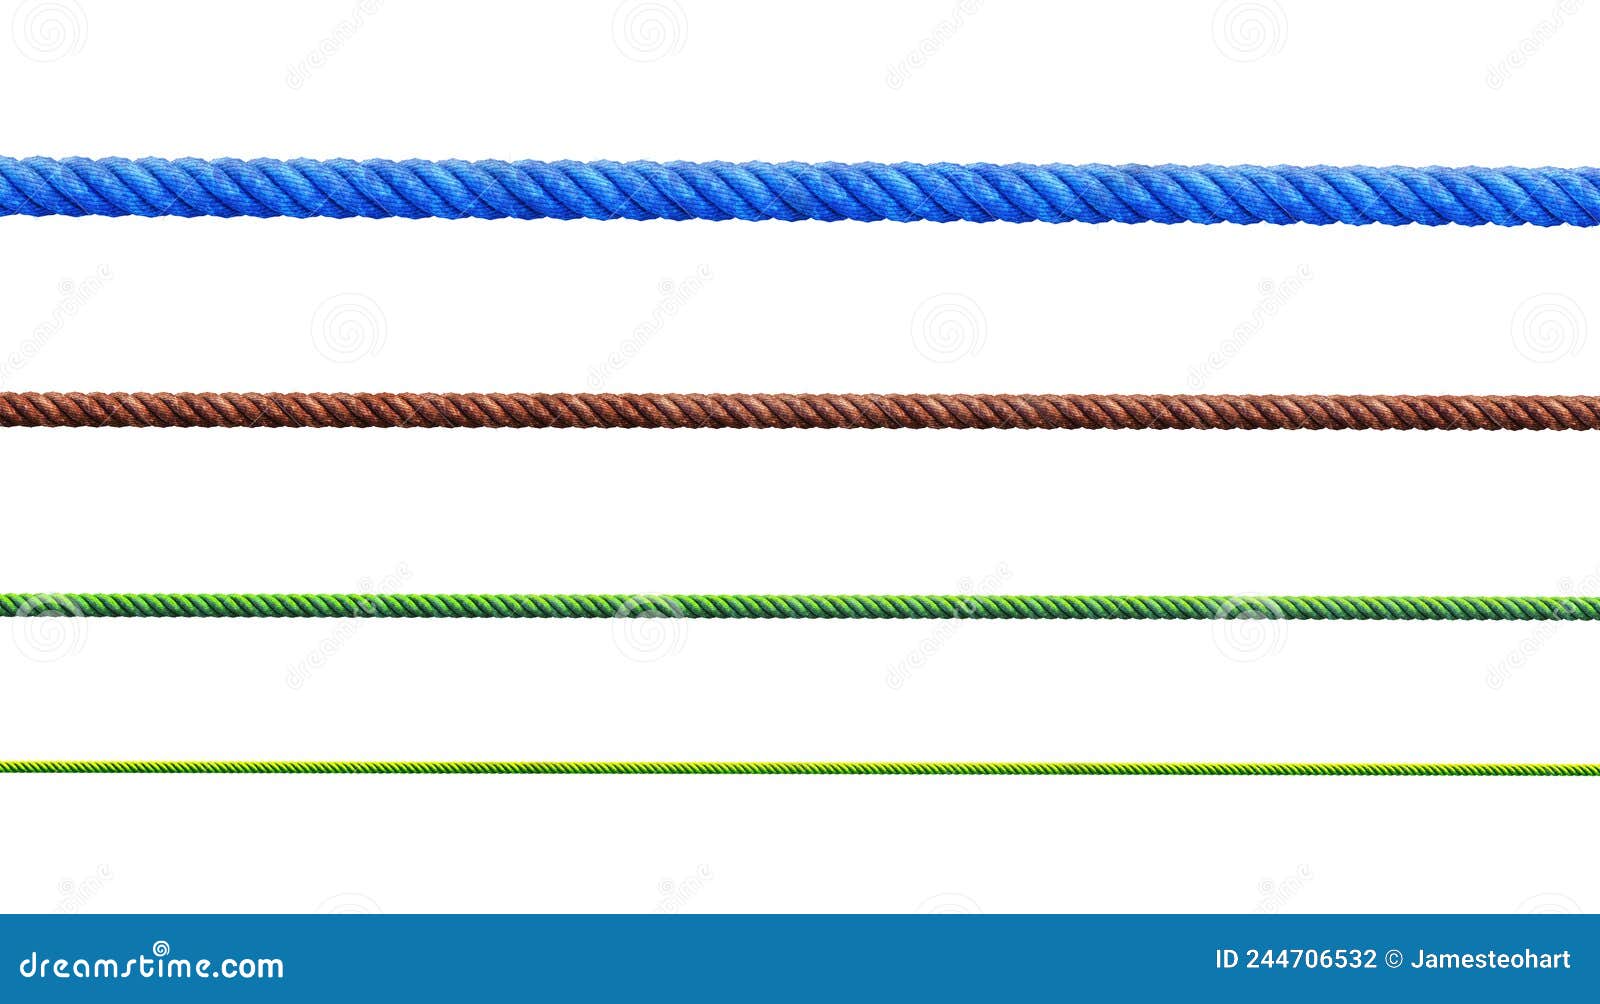 various colorful ropes  on white background